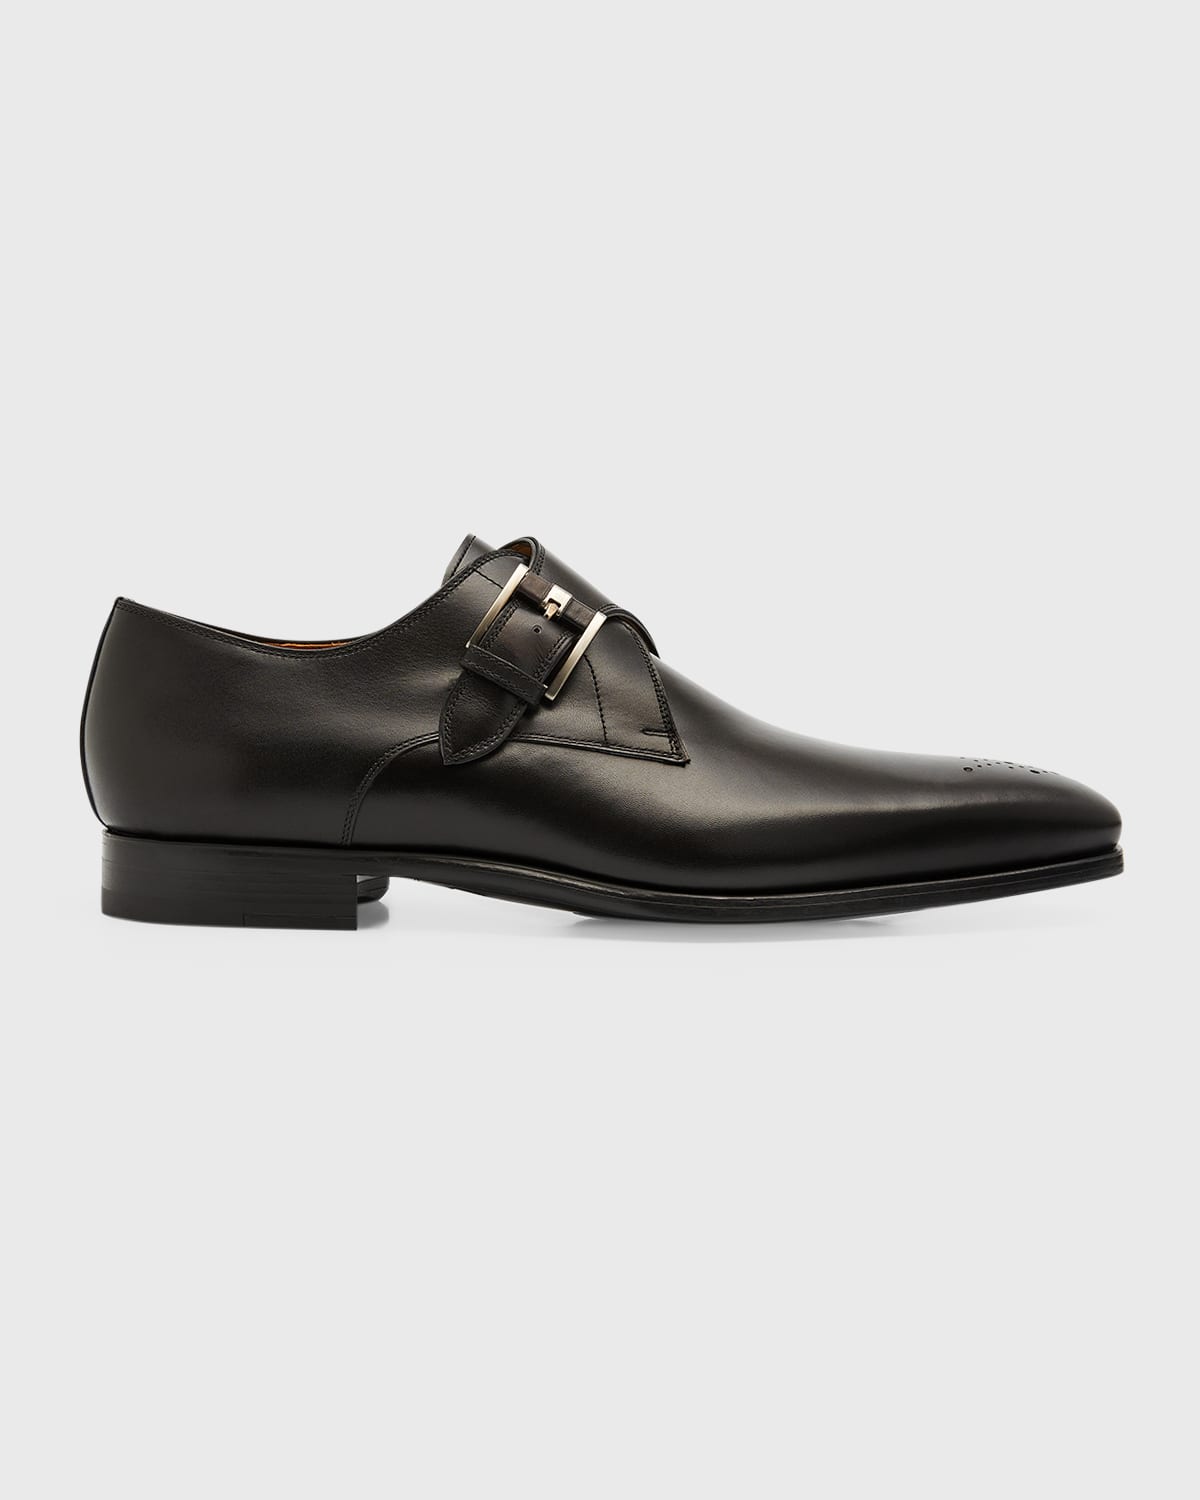 Magnanni Men's Ondara II Double Monk Strap Leather Loafers | Neiman Marcus